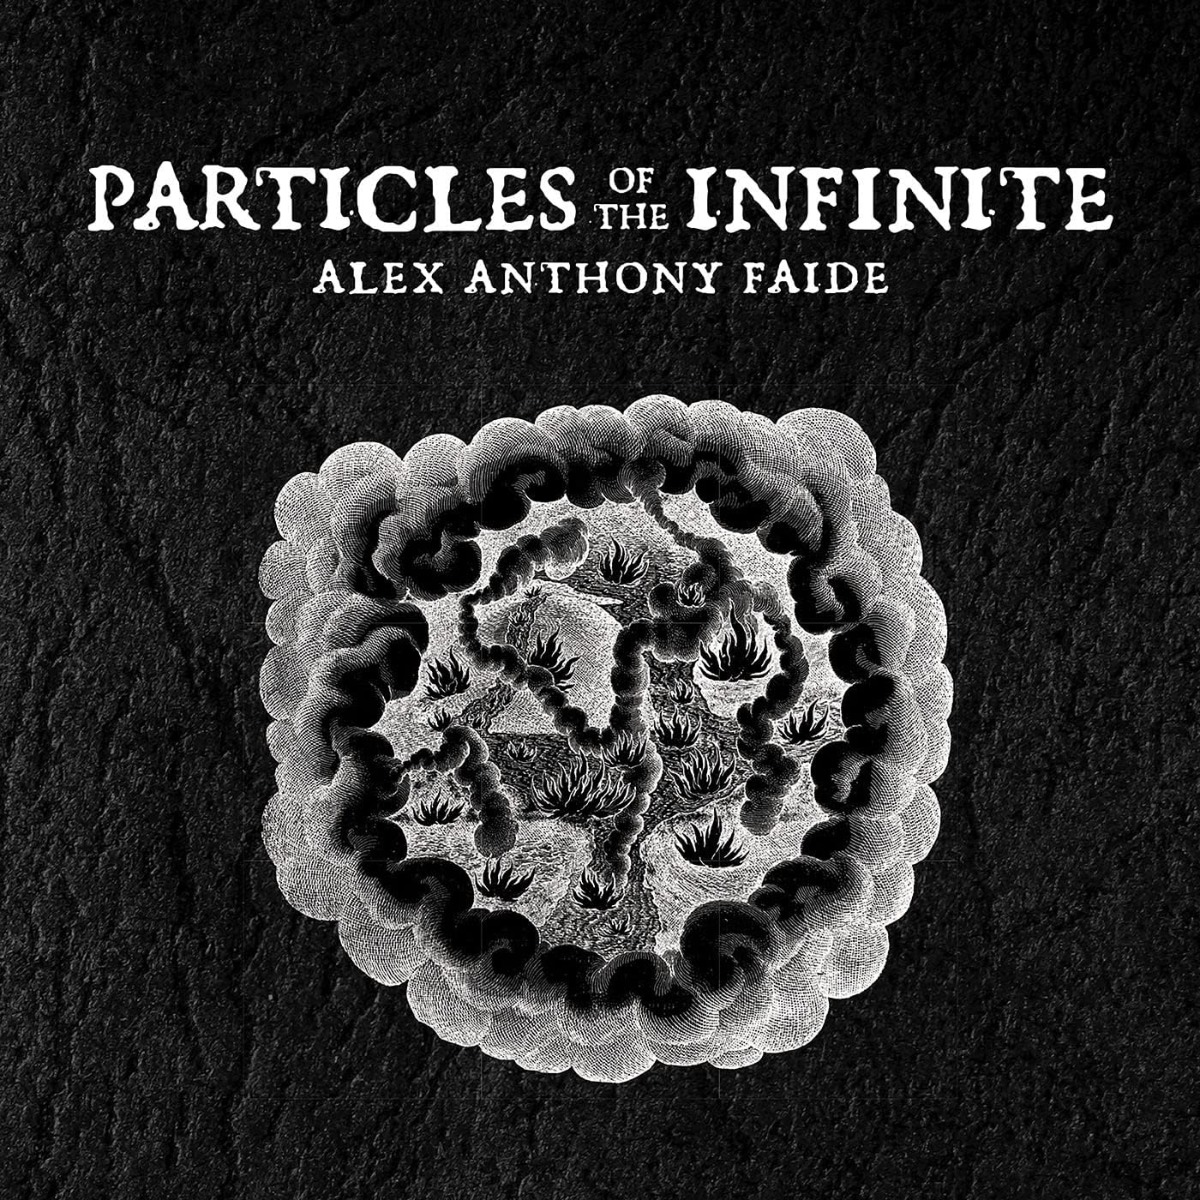  Alex Anthony Faide - Particles Of The Infinite - CD